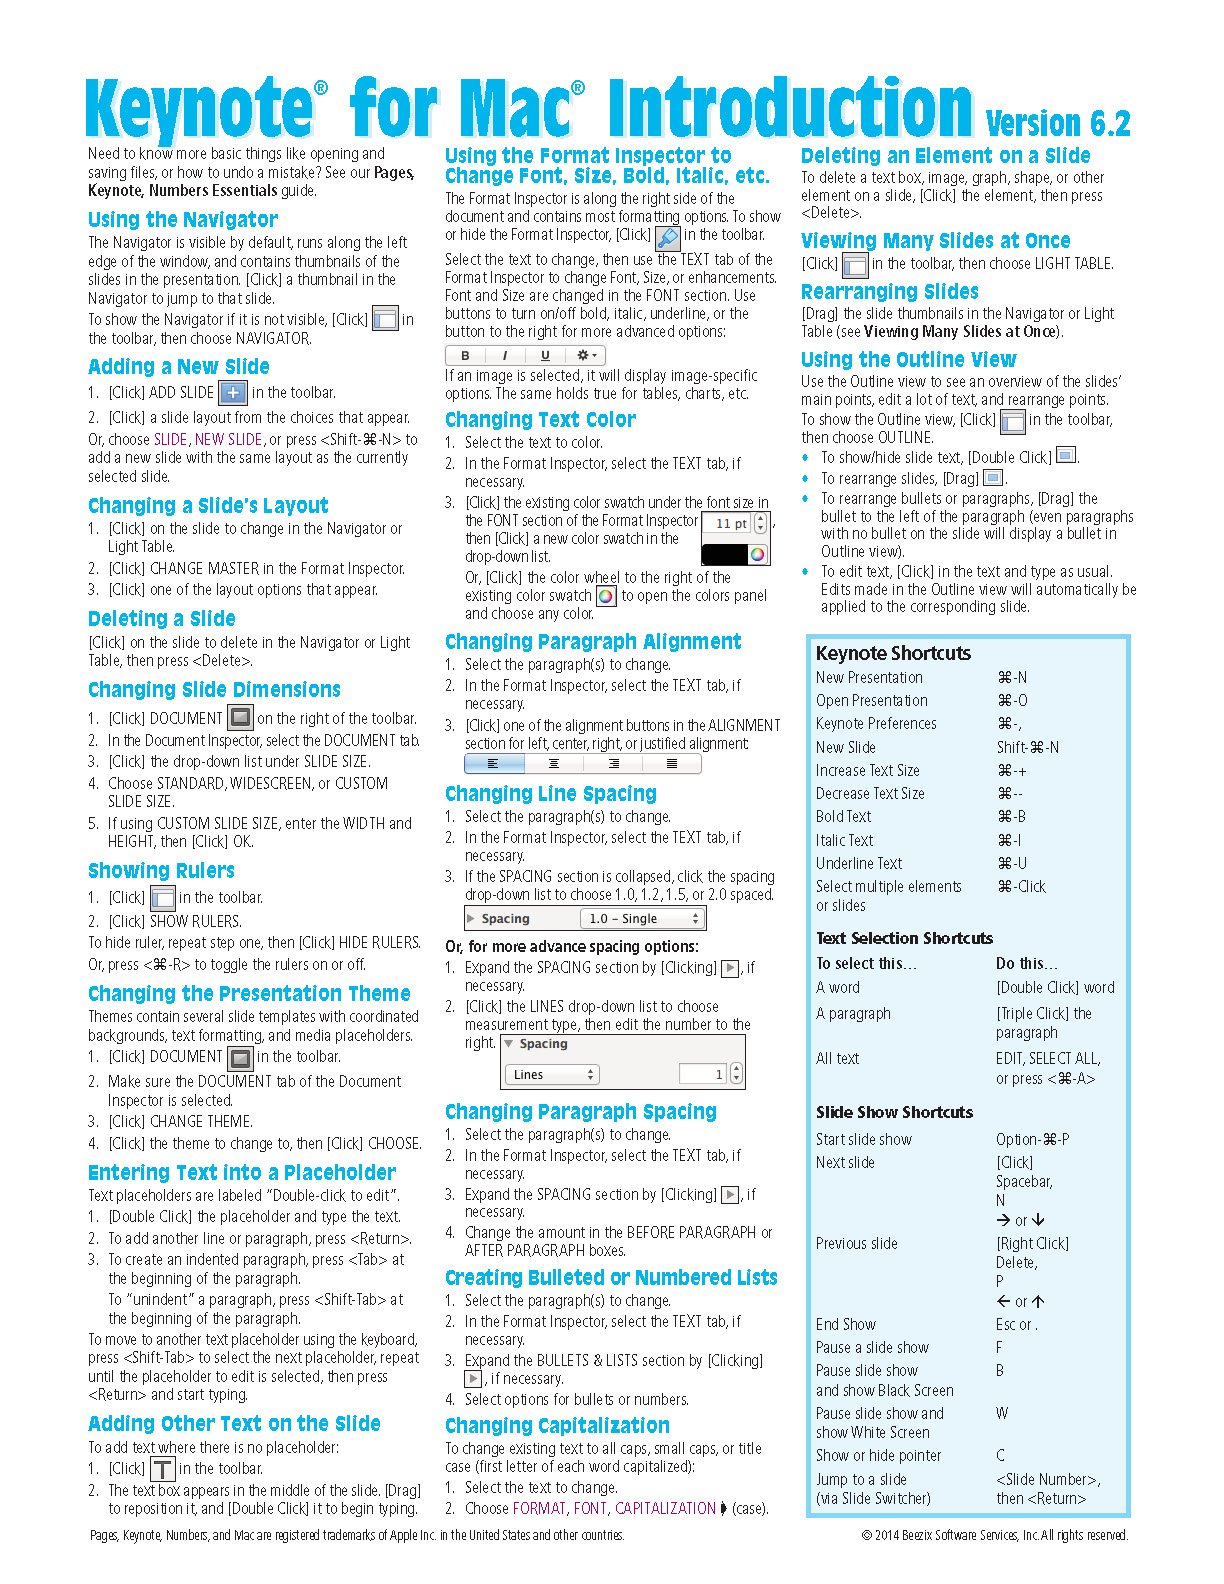 Keynote for Mac Quick Reference Guide, version 6.2: Introduction (Cheat Sheet of Instructions, Tips & Shortcuts - Laminated Card)